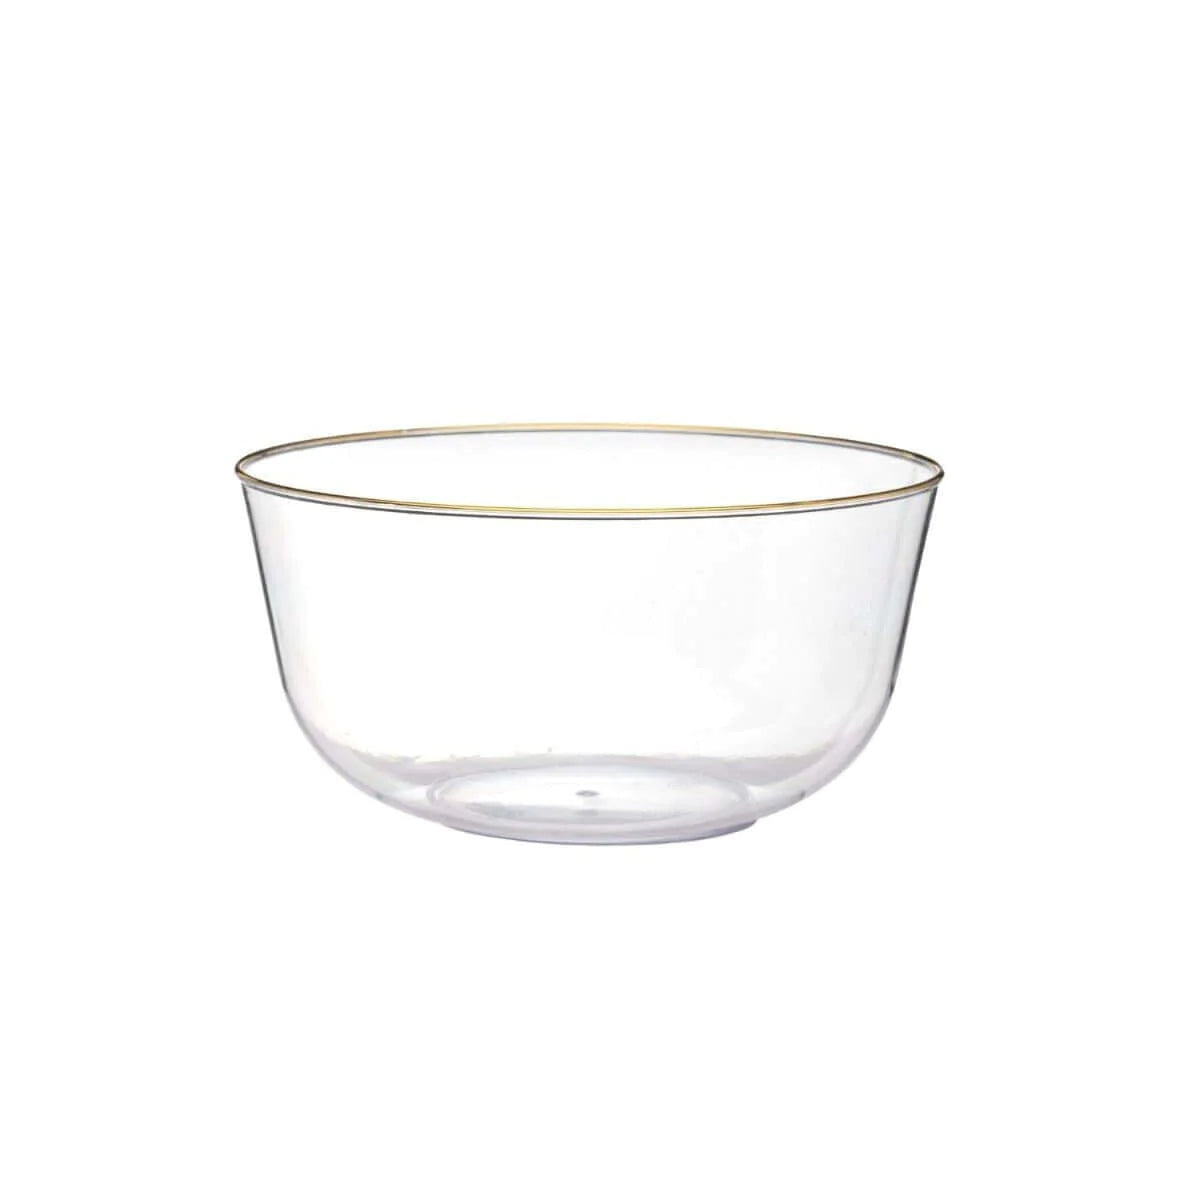 Trend Glass Look Gold Rim Bowls 10 Ct